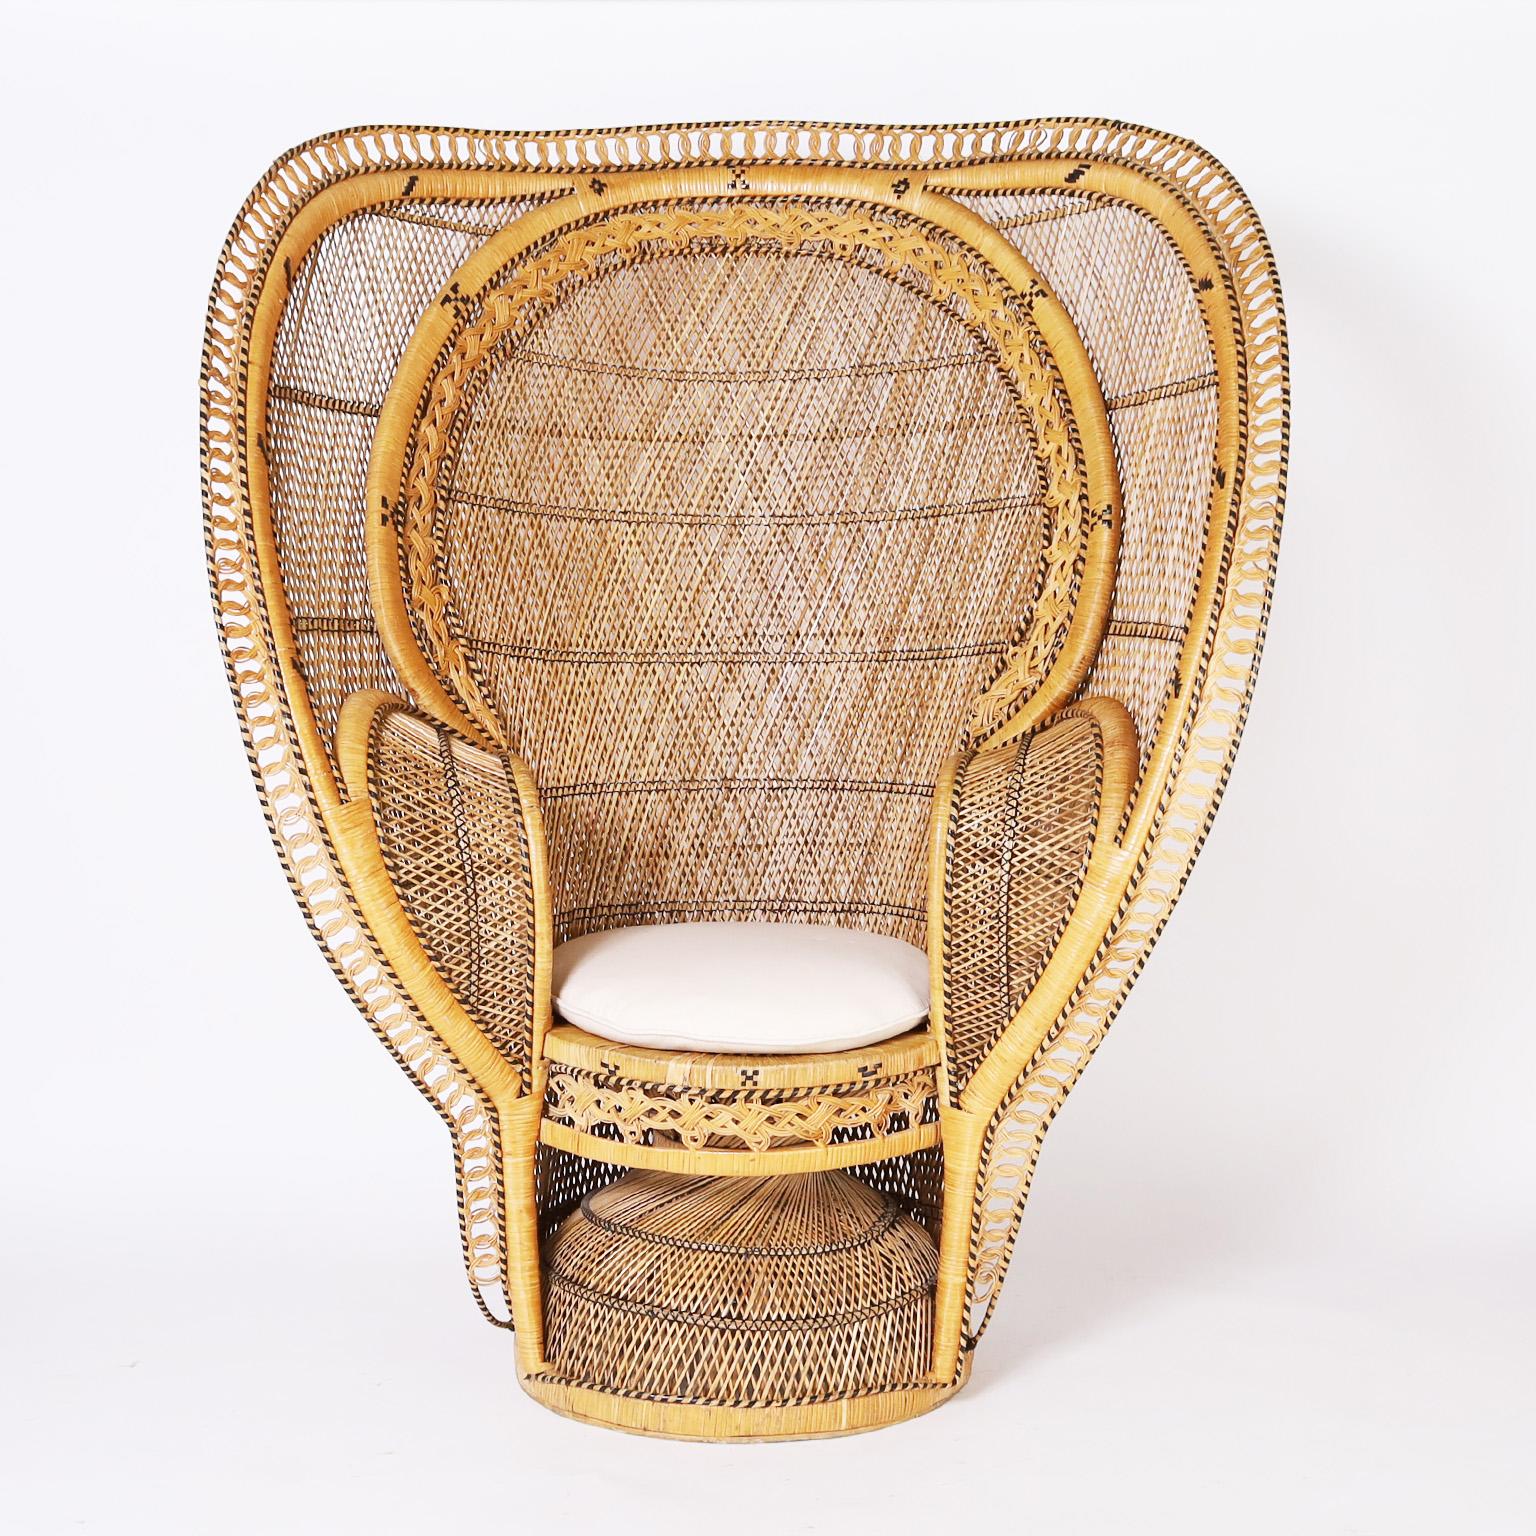 Rare and remarkable pair of Anglo Indian chairs expertly crafted in wicker and reed in a grand form as a peacock chair inside a cobra form outer layer. Best of the genre.